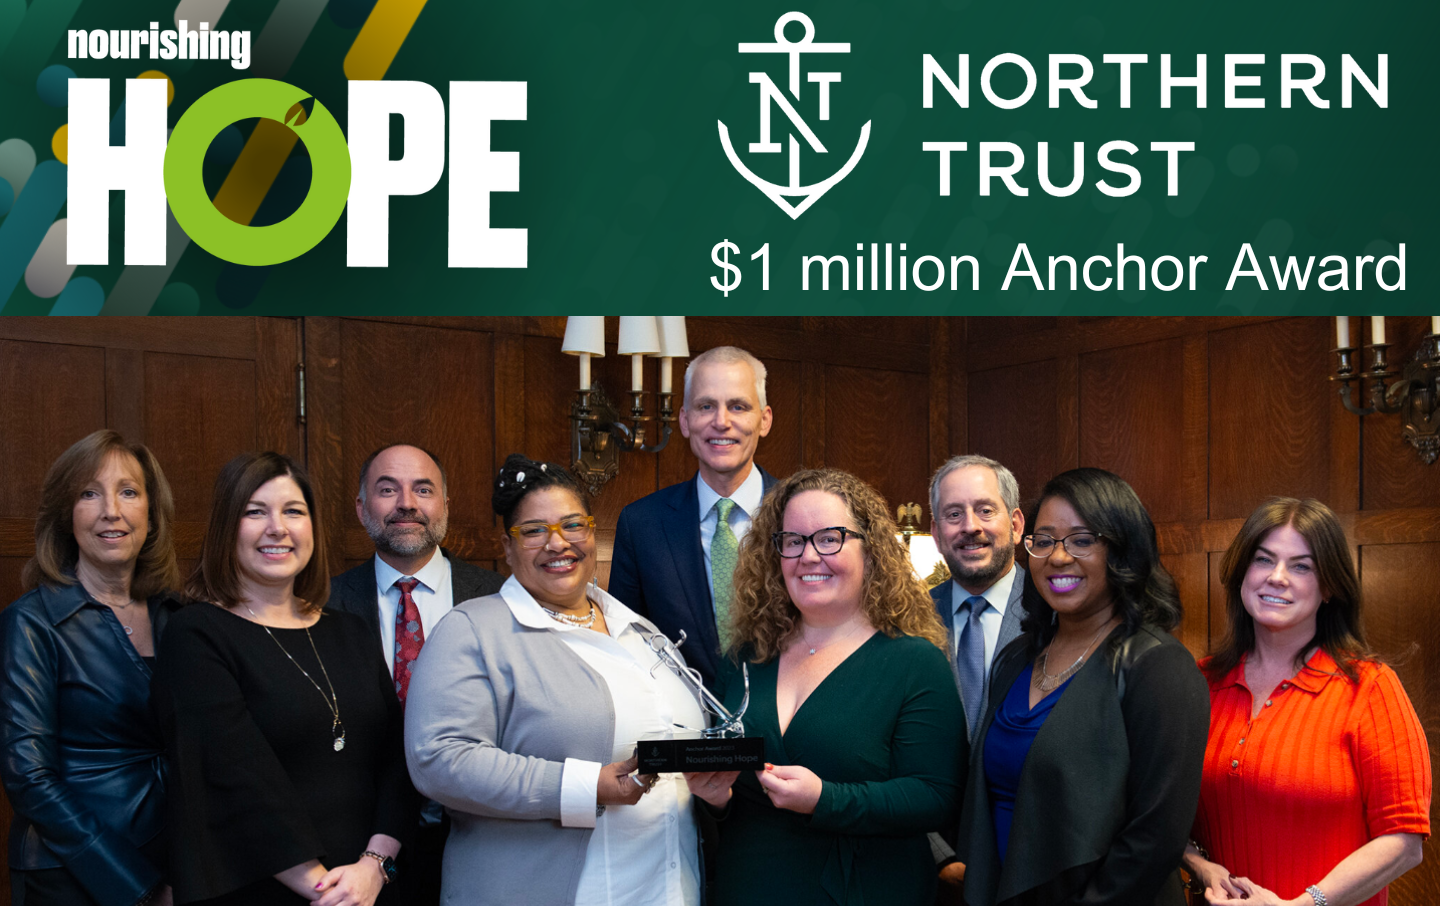 Members of Nourishing Hope's leadership team stand with Northern Trust executives to receive the inaugural Anchor Award for $1million.